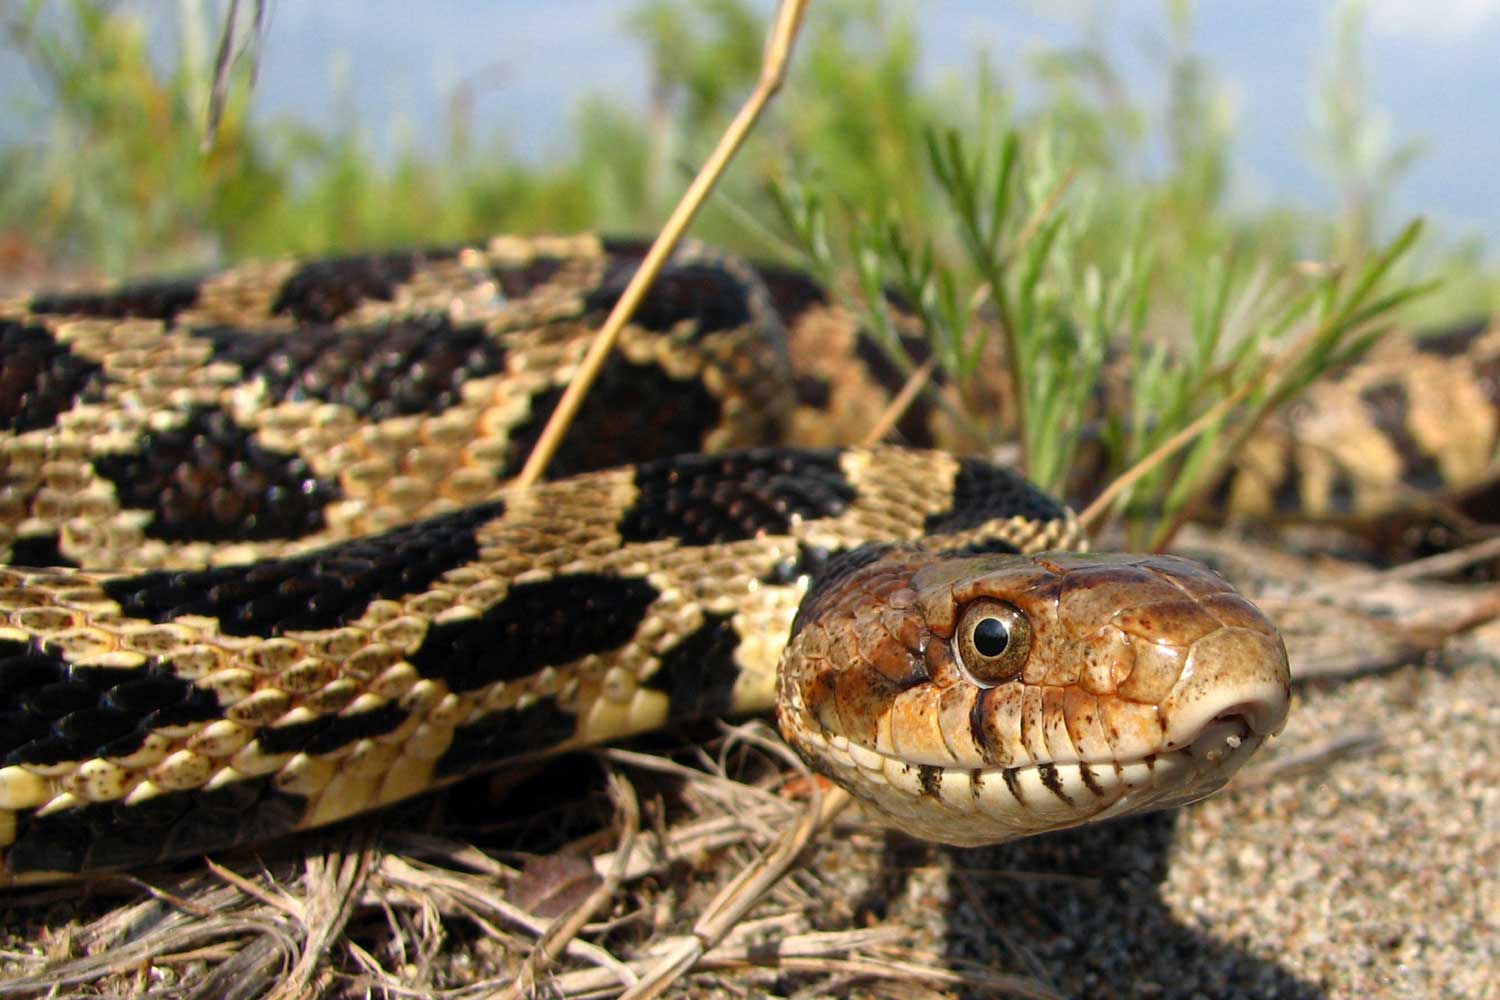 A closeup of a fox snake on the ground with grass in the background.